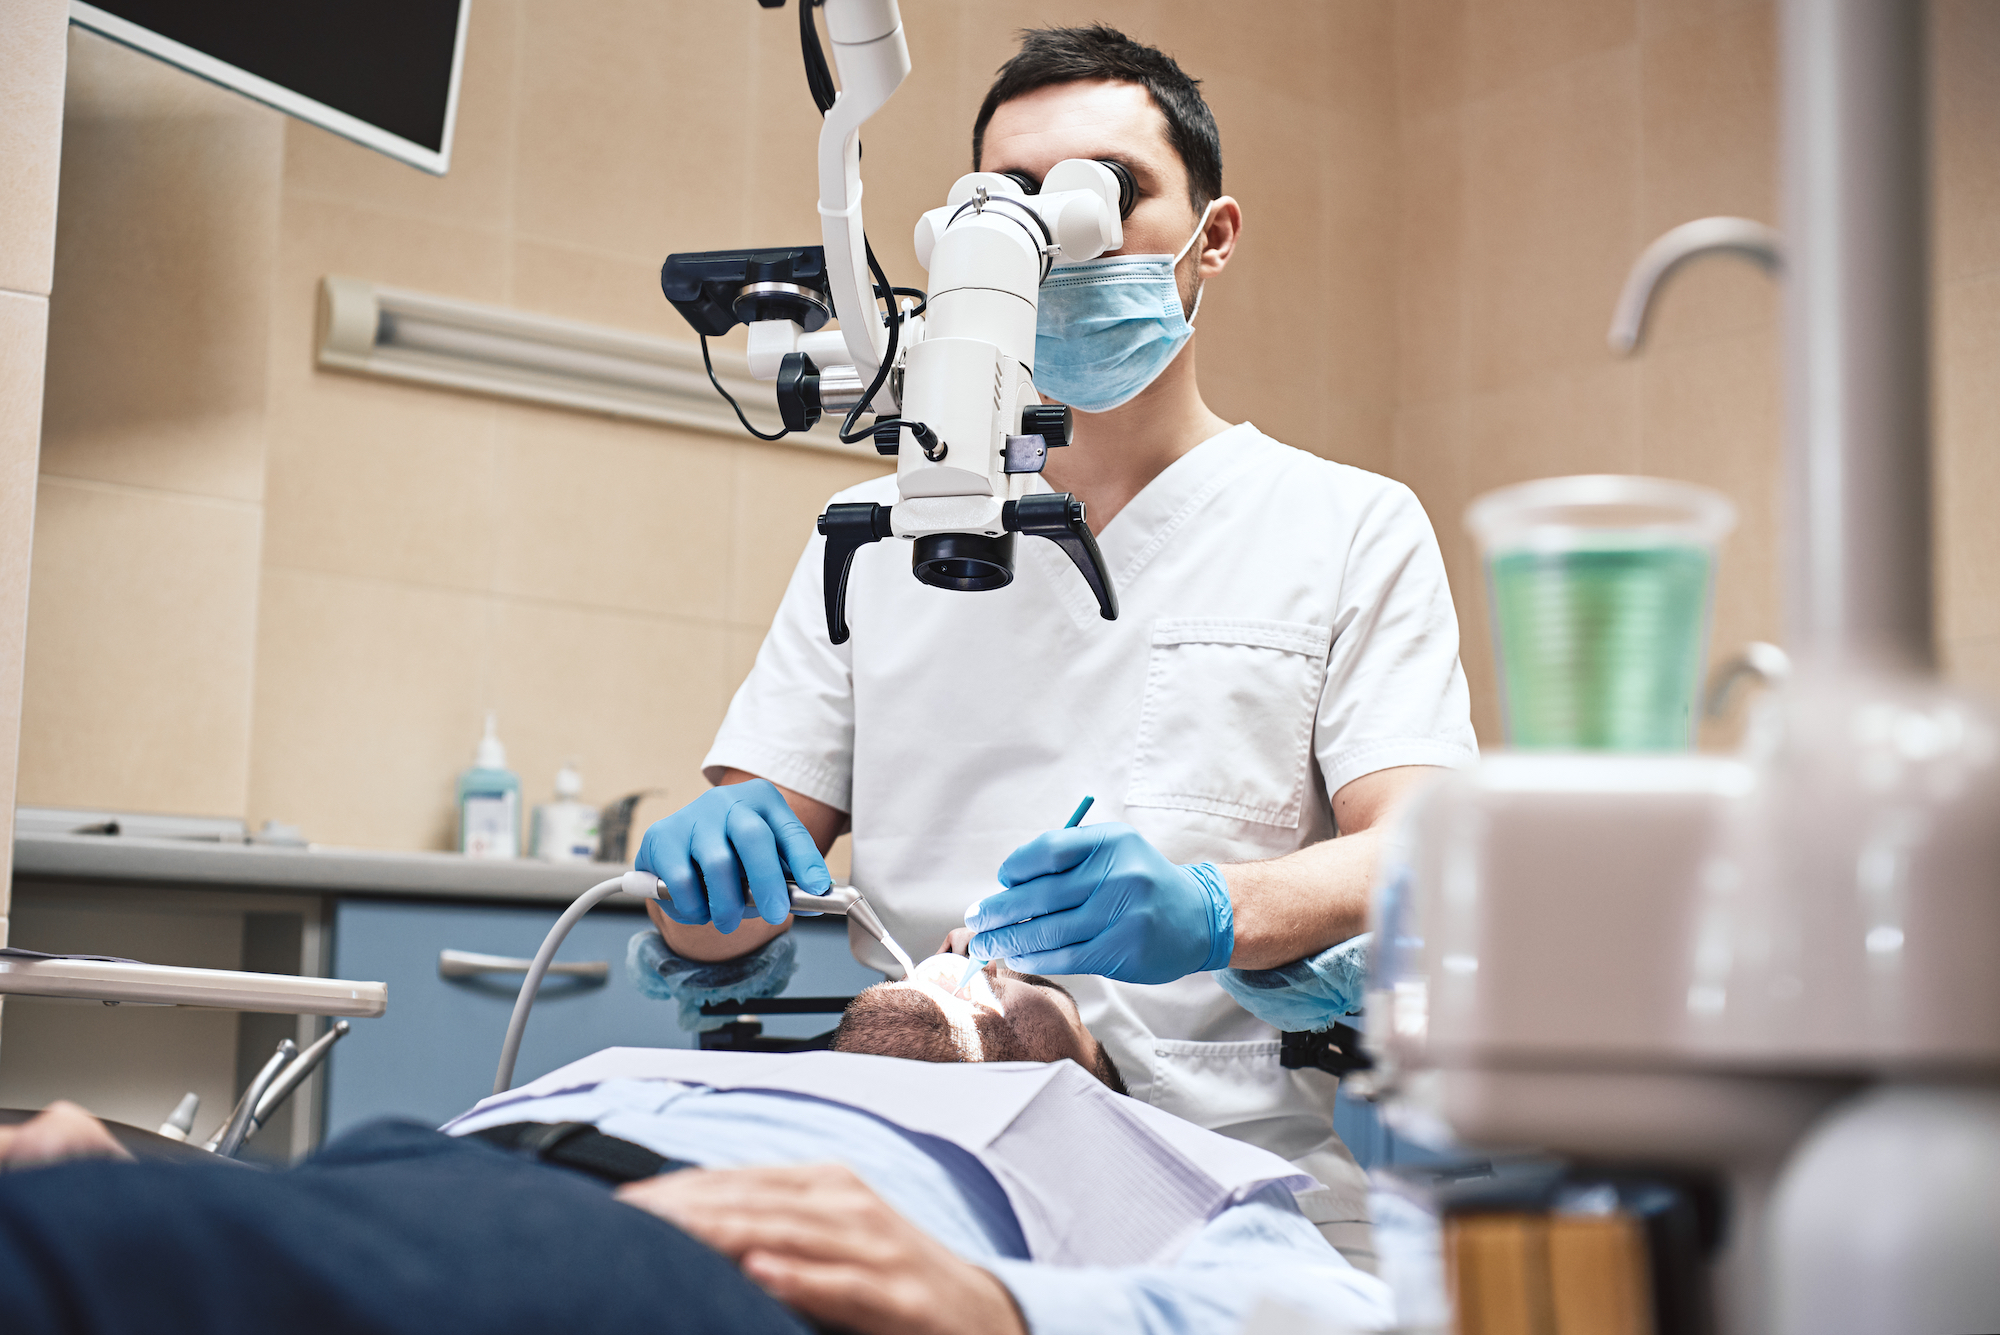 A dentist is pictured treating a patient.